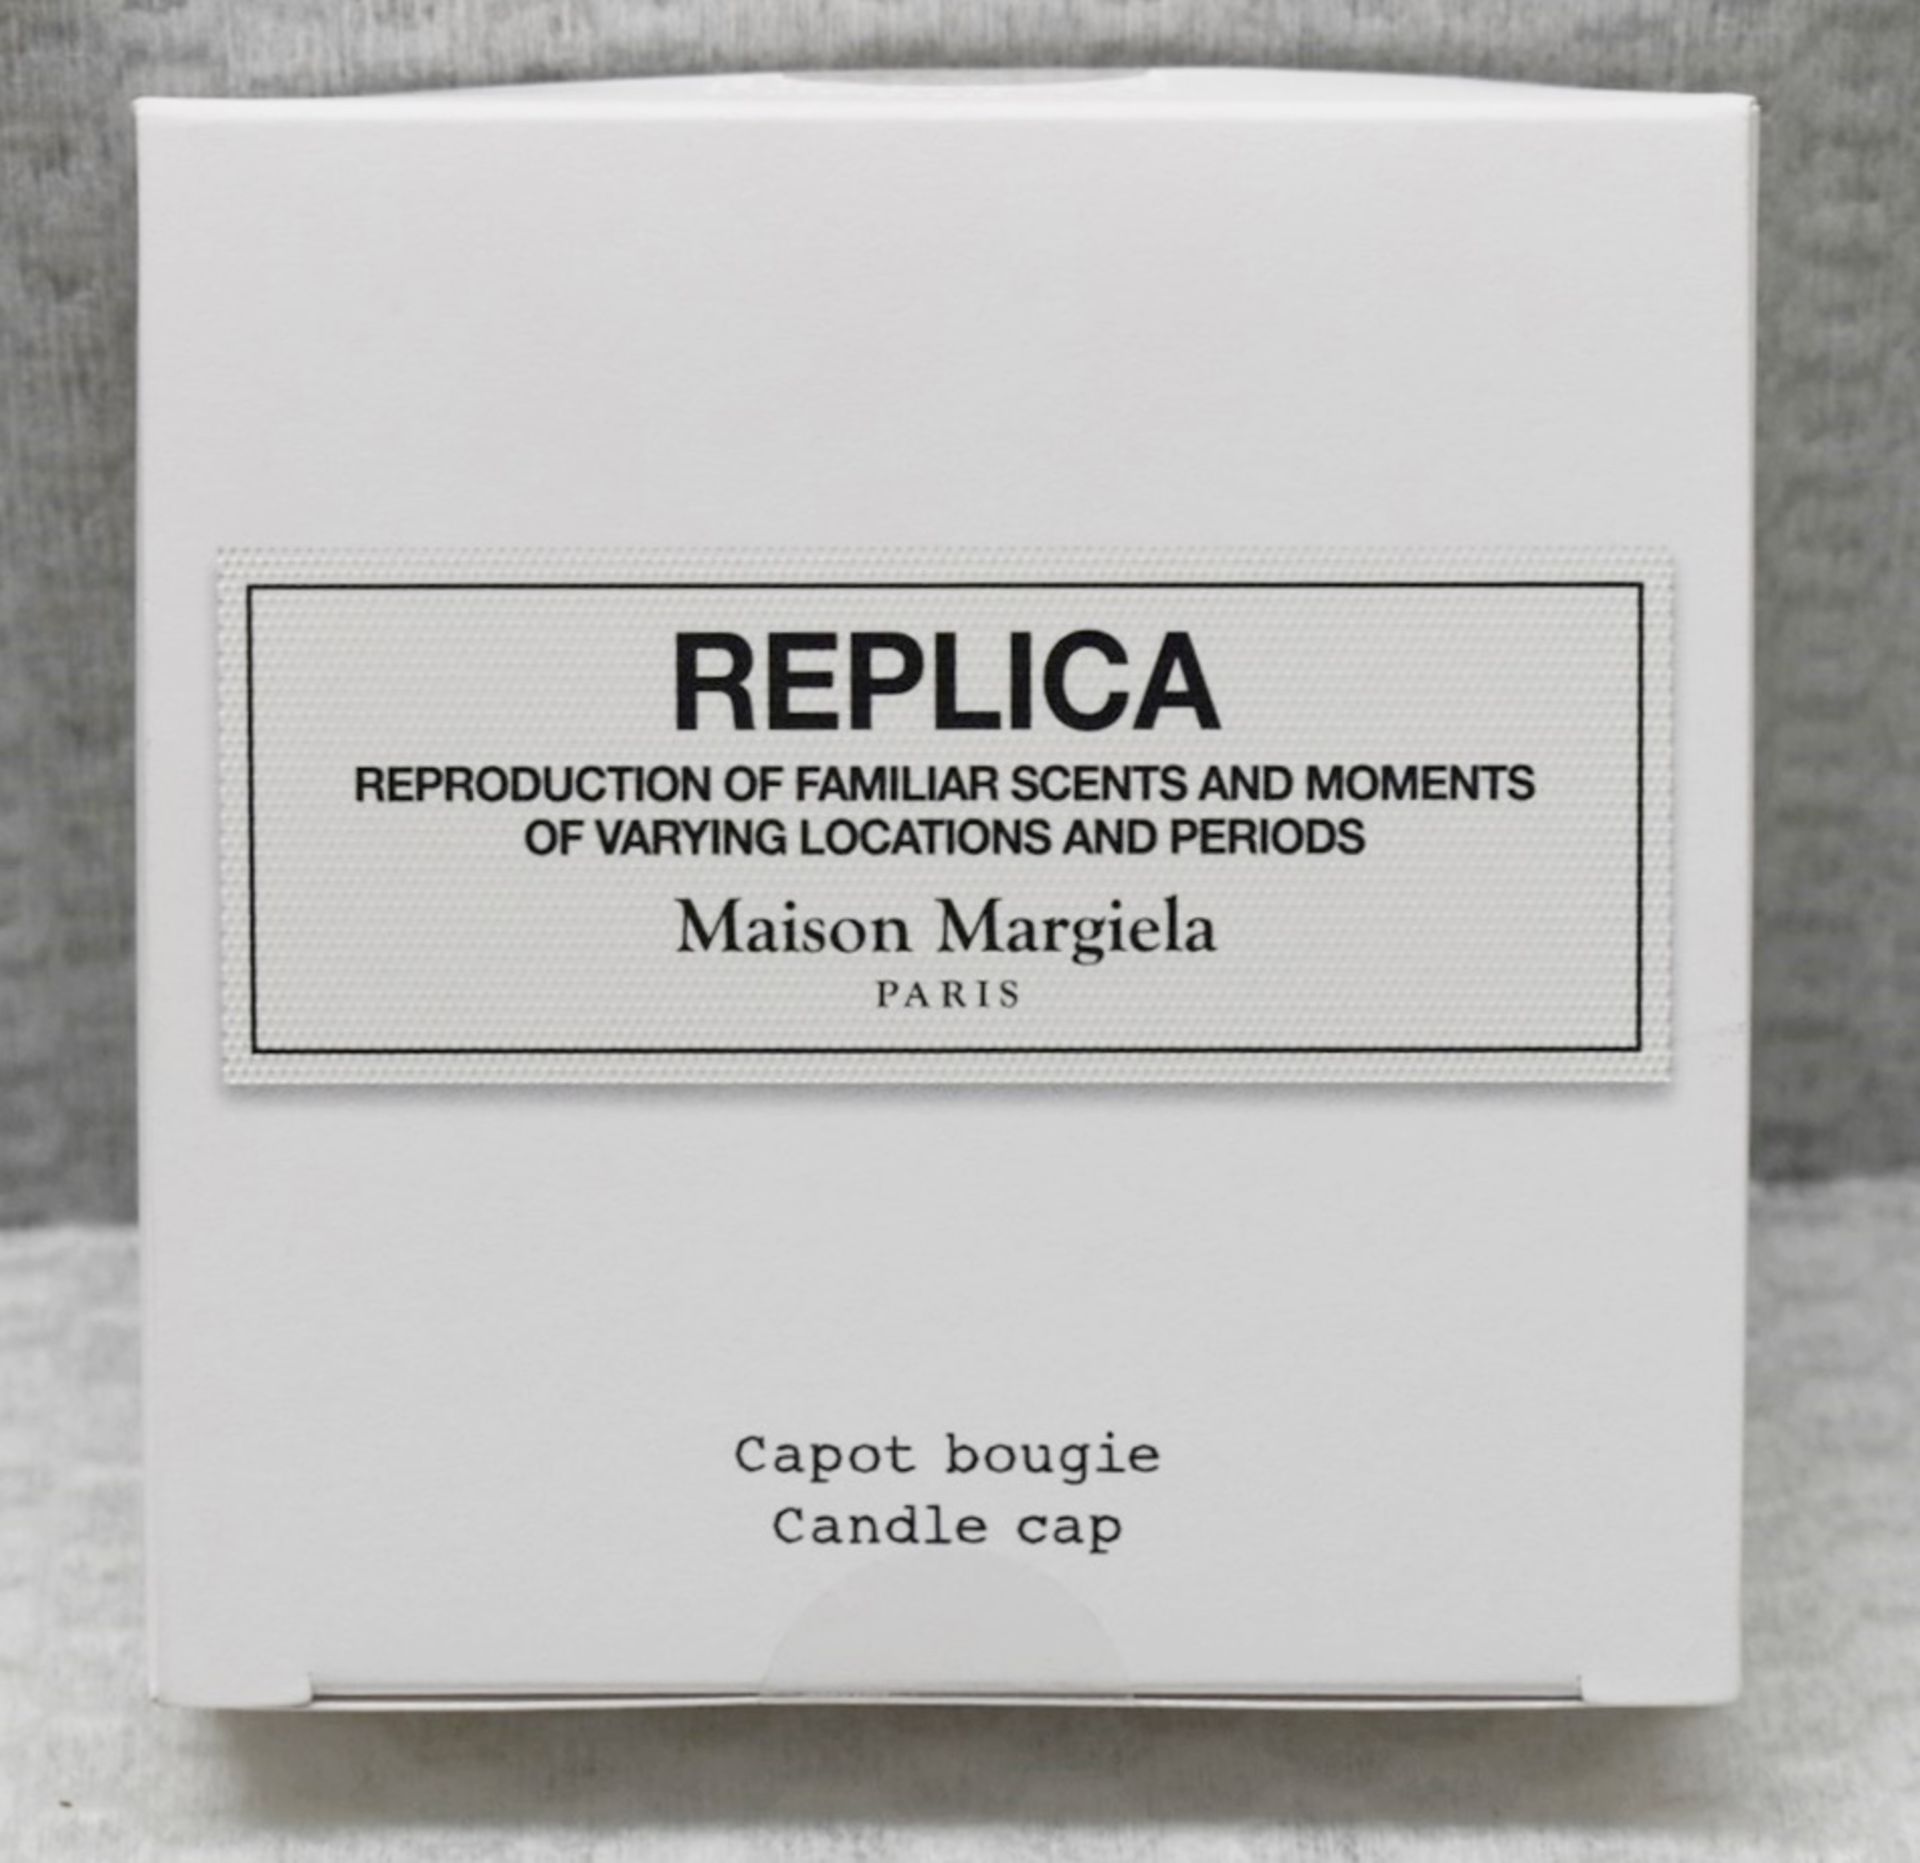 MAISON MARGIELA 'Replica' Luxury Metal Candle Cap & Snuffer (2 Items) - New / Unused Boxed Stock - - Image 5 of 8